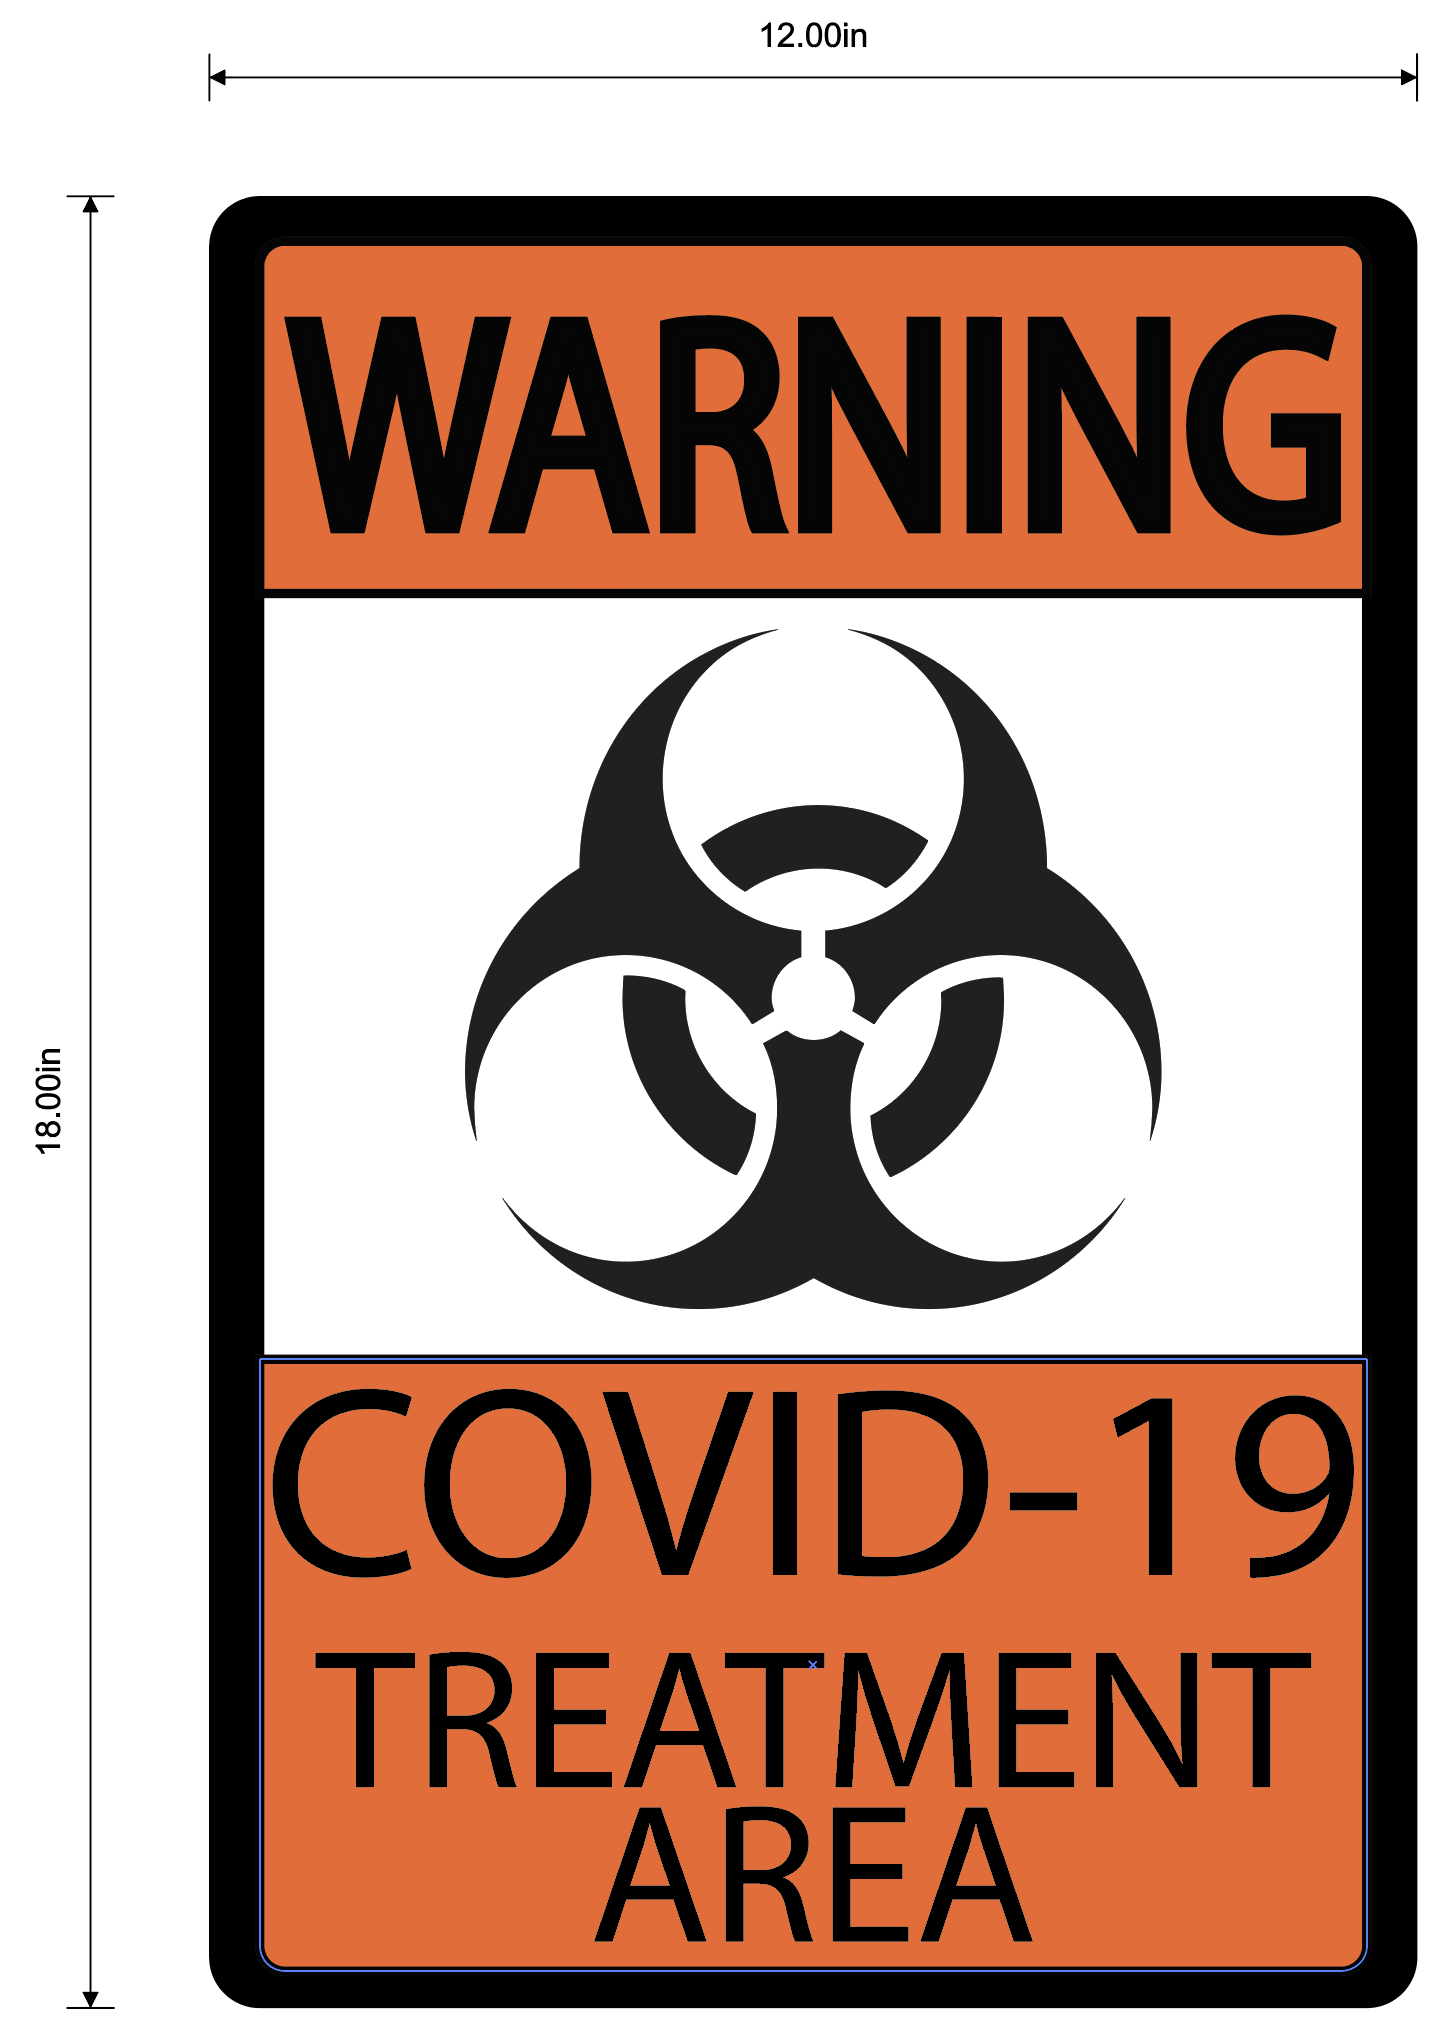 "Warning, COVID-19 Treatment Area" Durable Matte Laminated Vinyl Floor Sign- Various Colors/Designs Available 12x18"